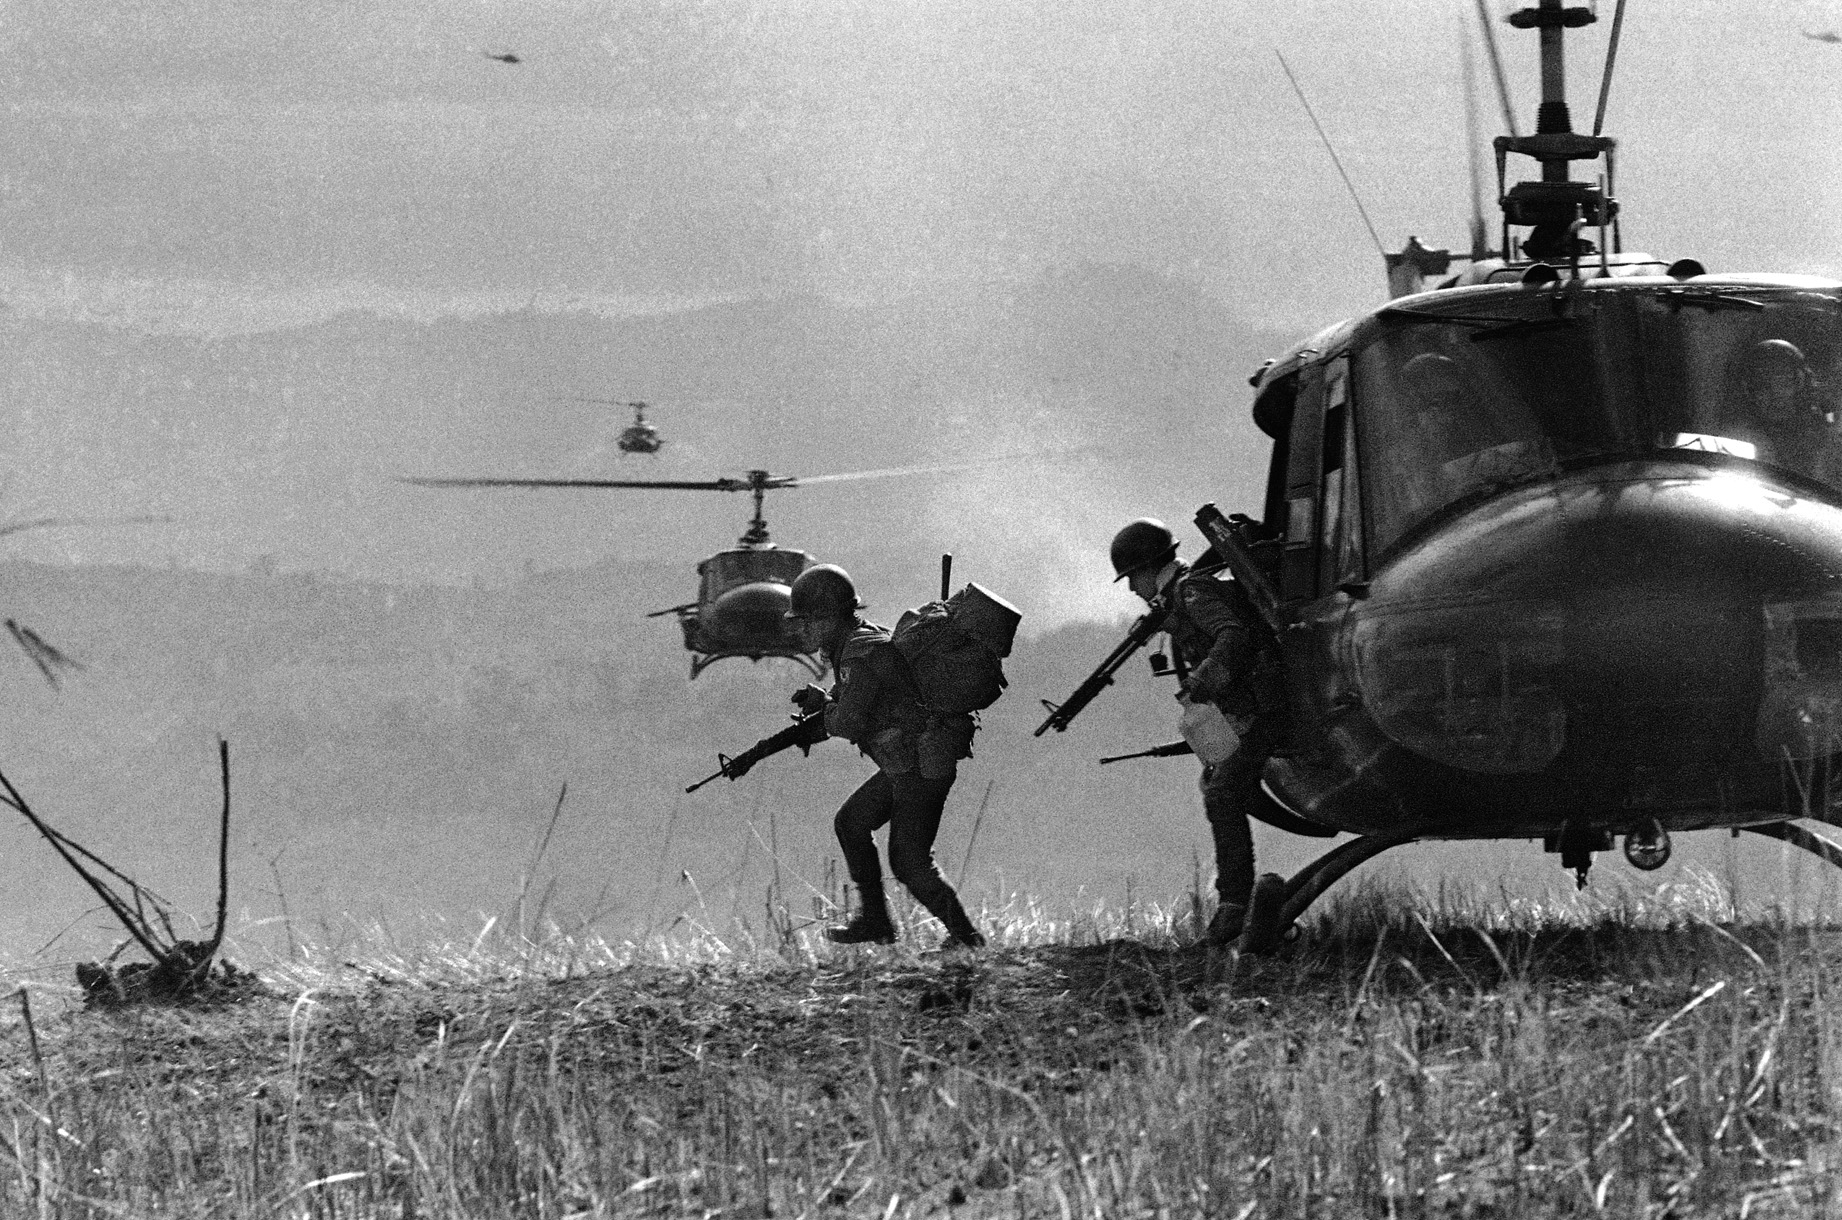 U.S. helicopters not only transported South Vietnamese troops to firebases inside Laos, but also carried them to Tchepone when the armored column stalled on Route 9. The March 6 air assault by elements of the South Vietnamese 1st Infantry Division was the largest helicopter assault of the war.